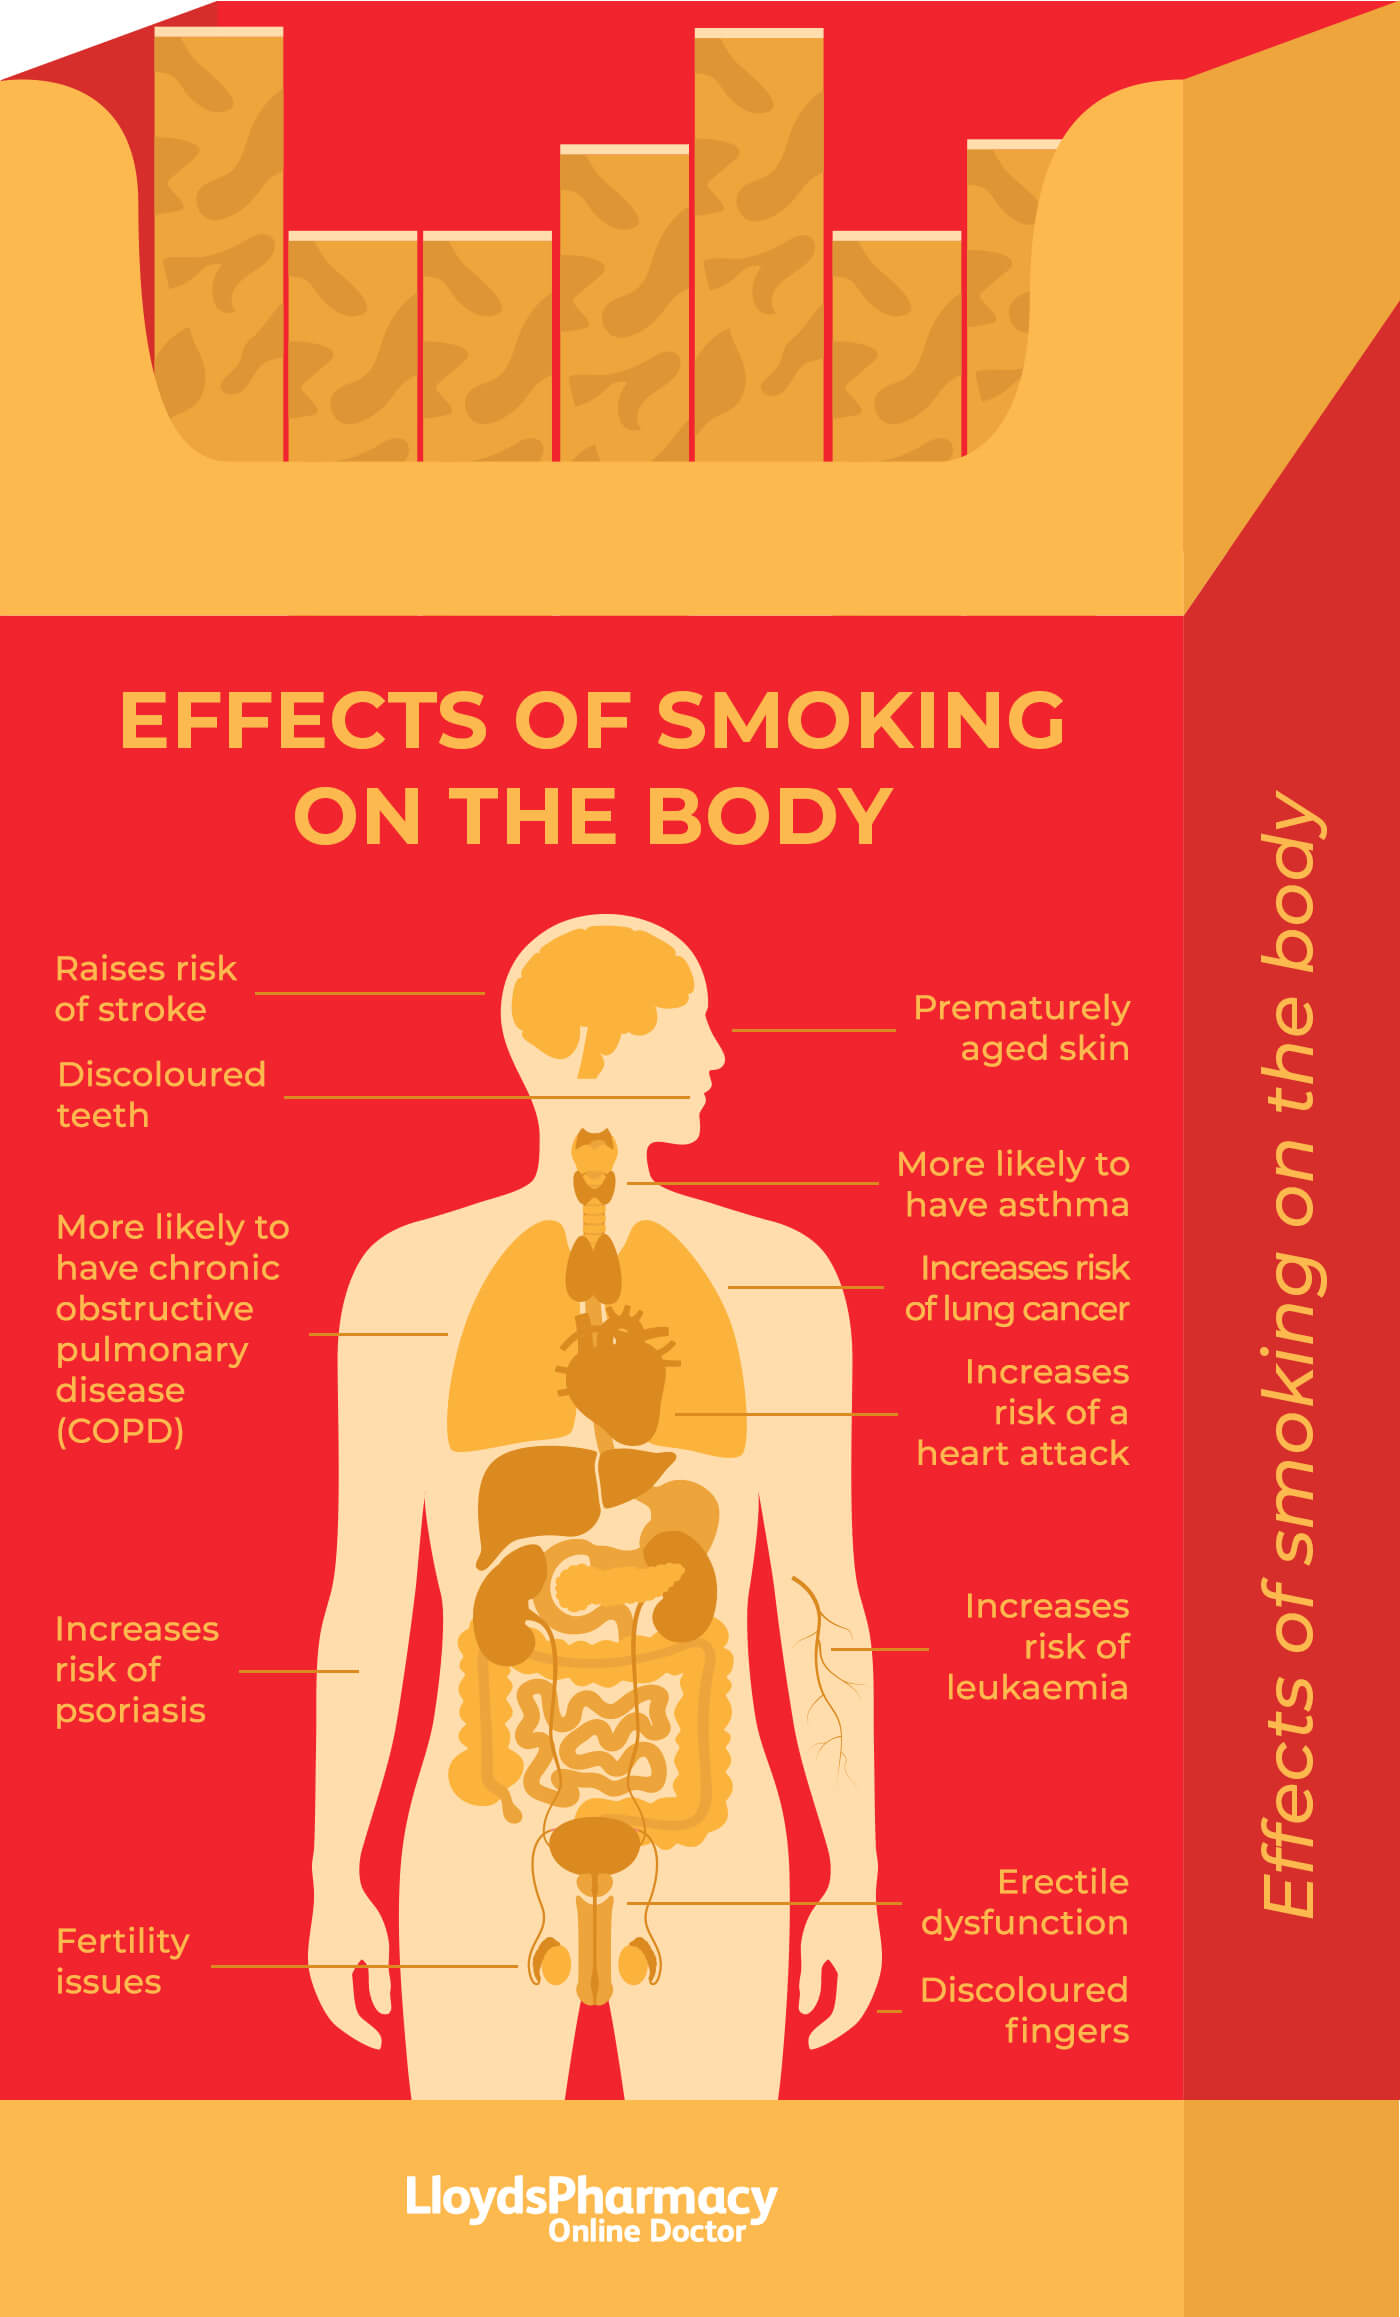 Effects of smoking on the body - stop smoking